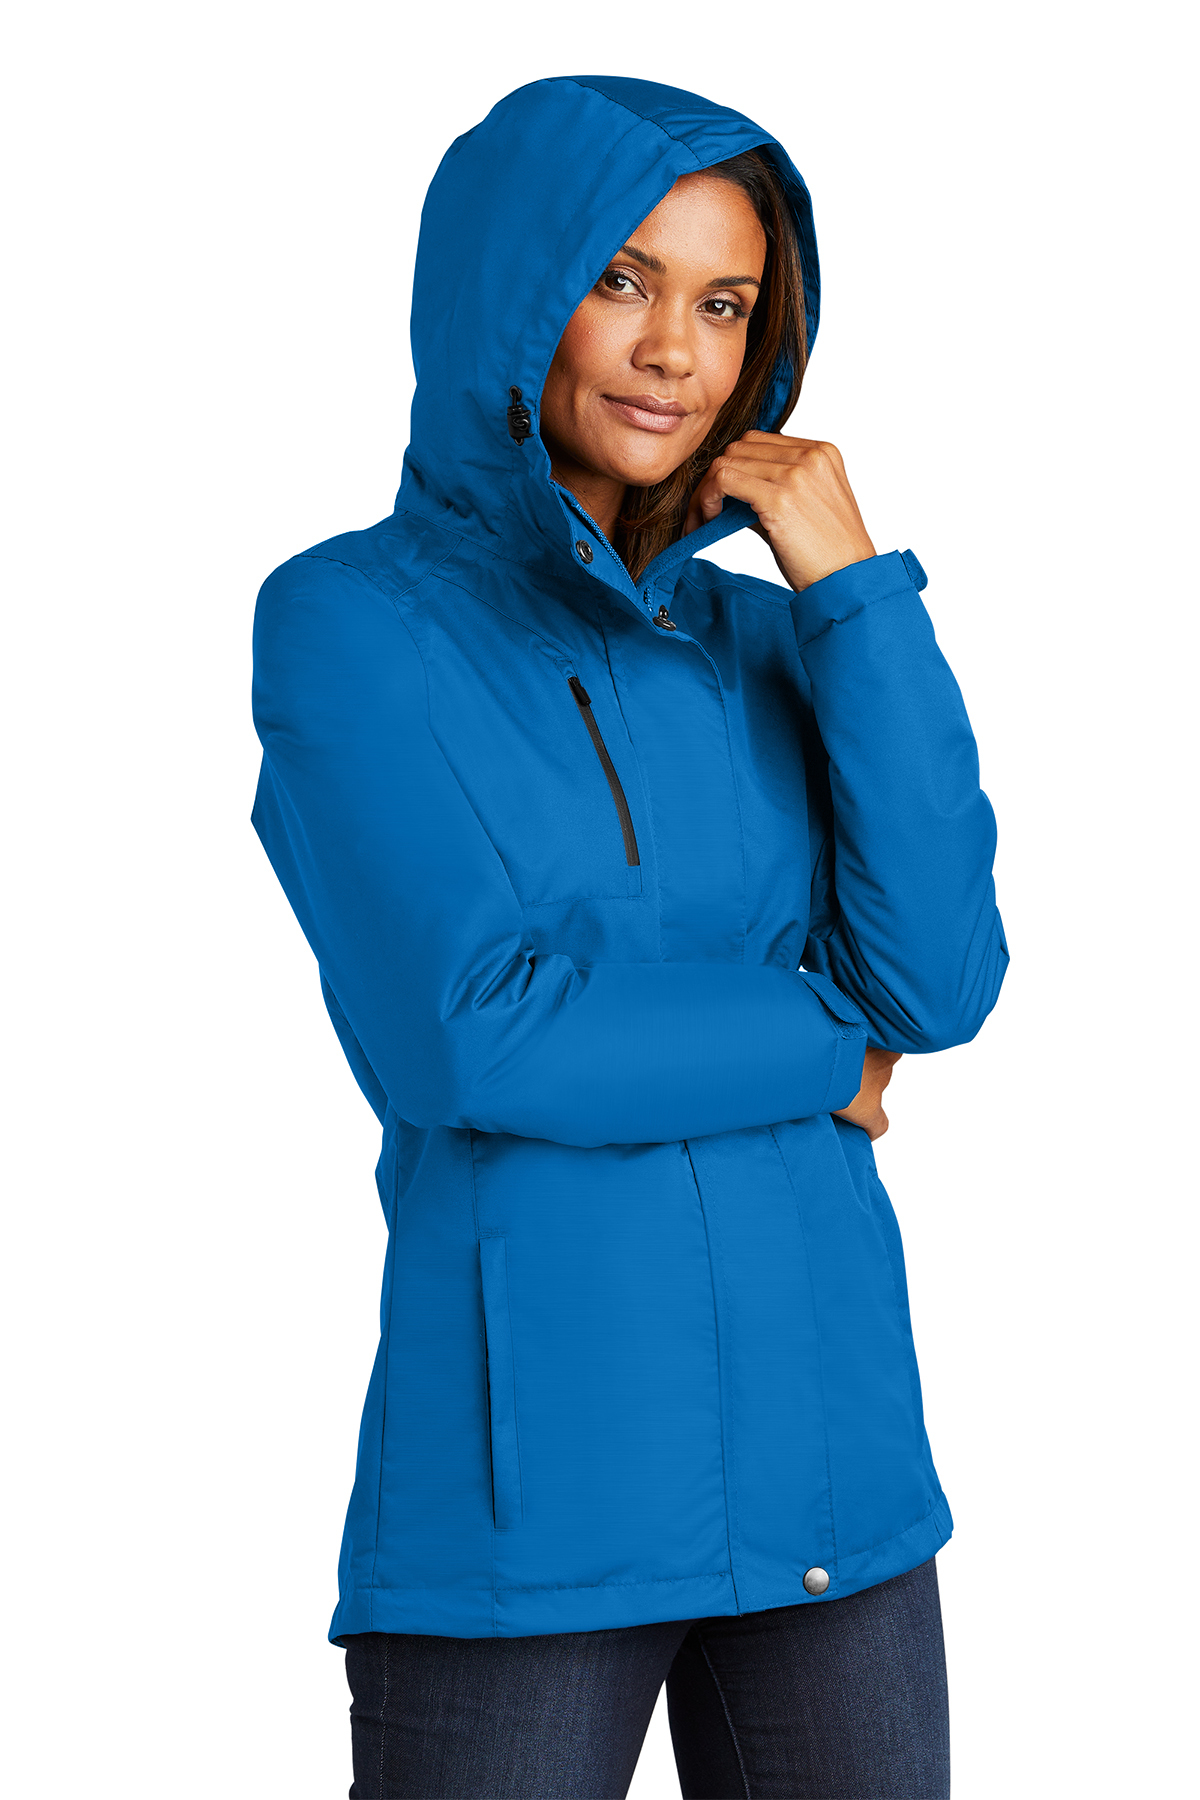 Port Authority Ladies All-Conditions Jacket | Product | SanMar